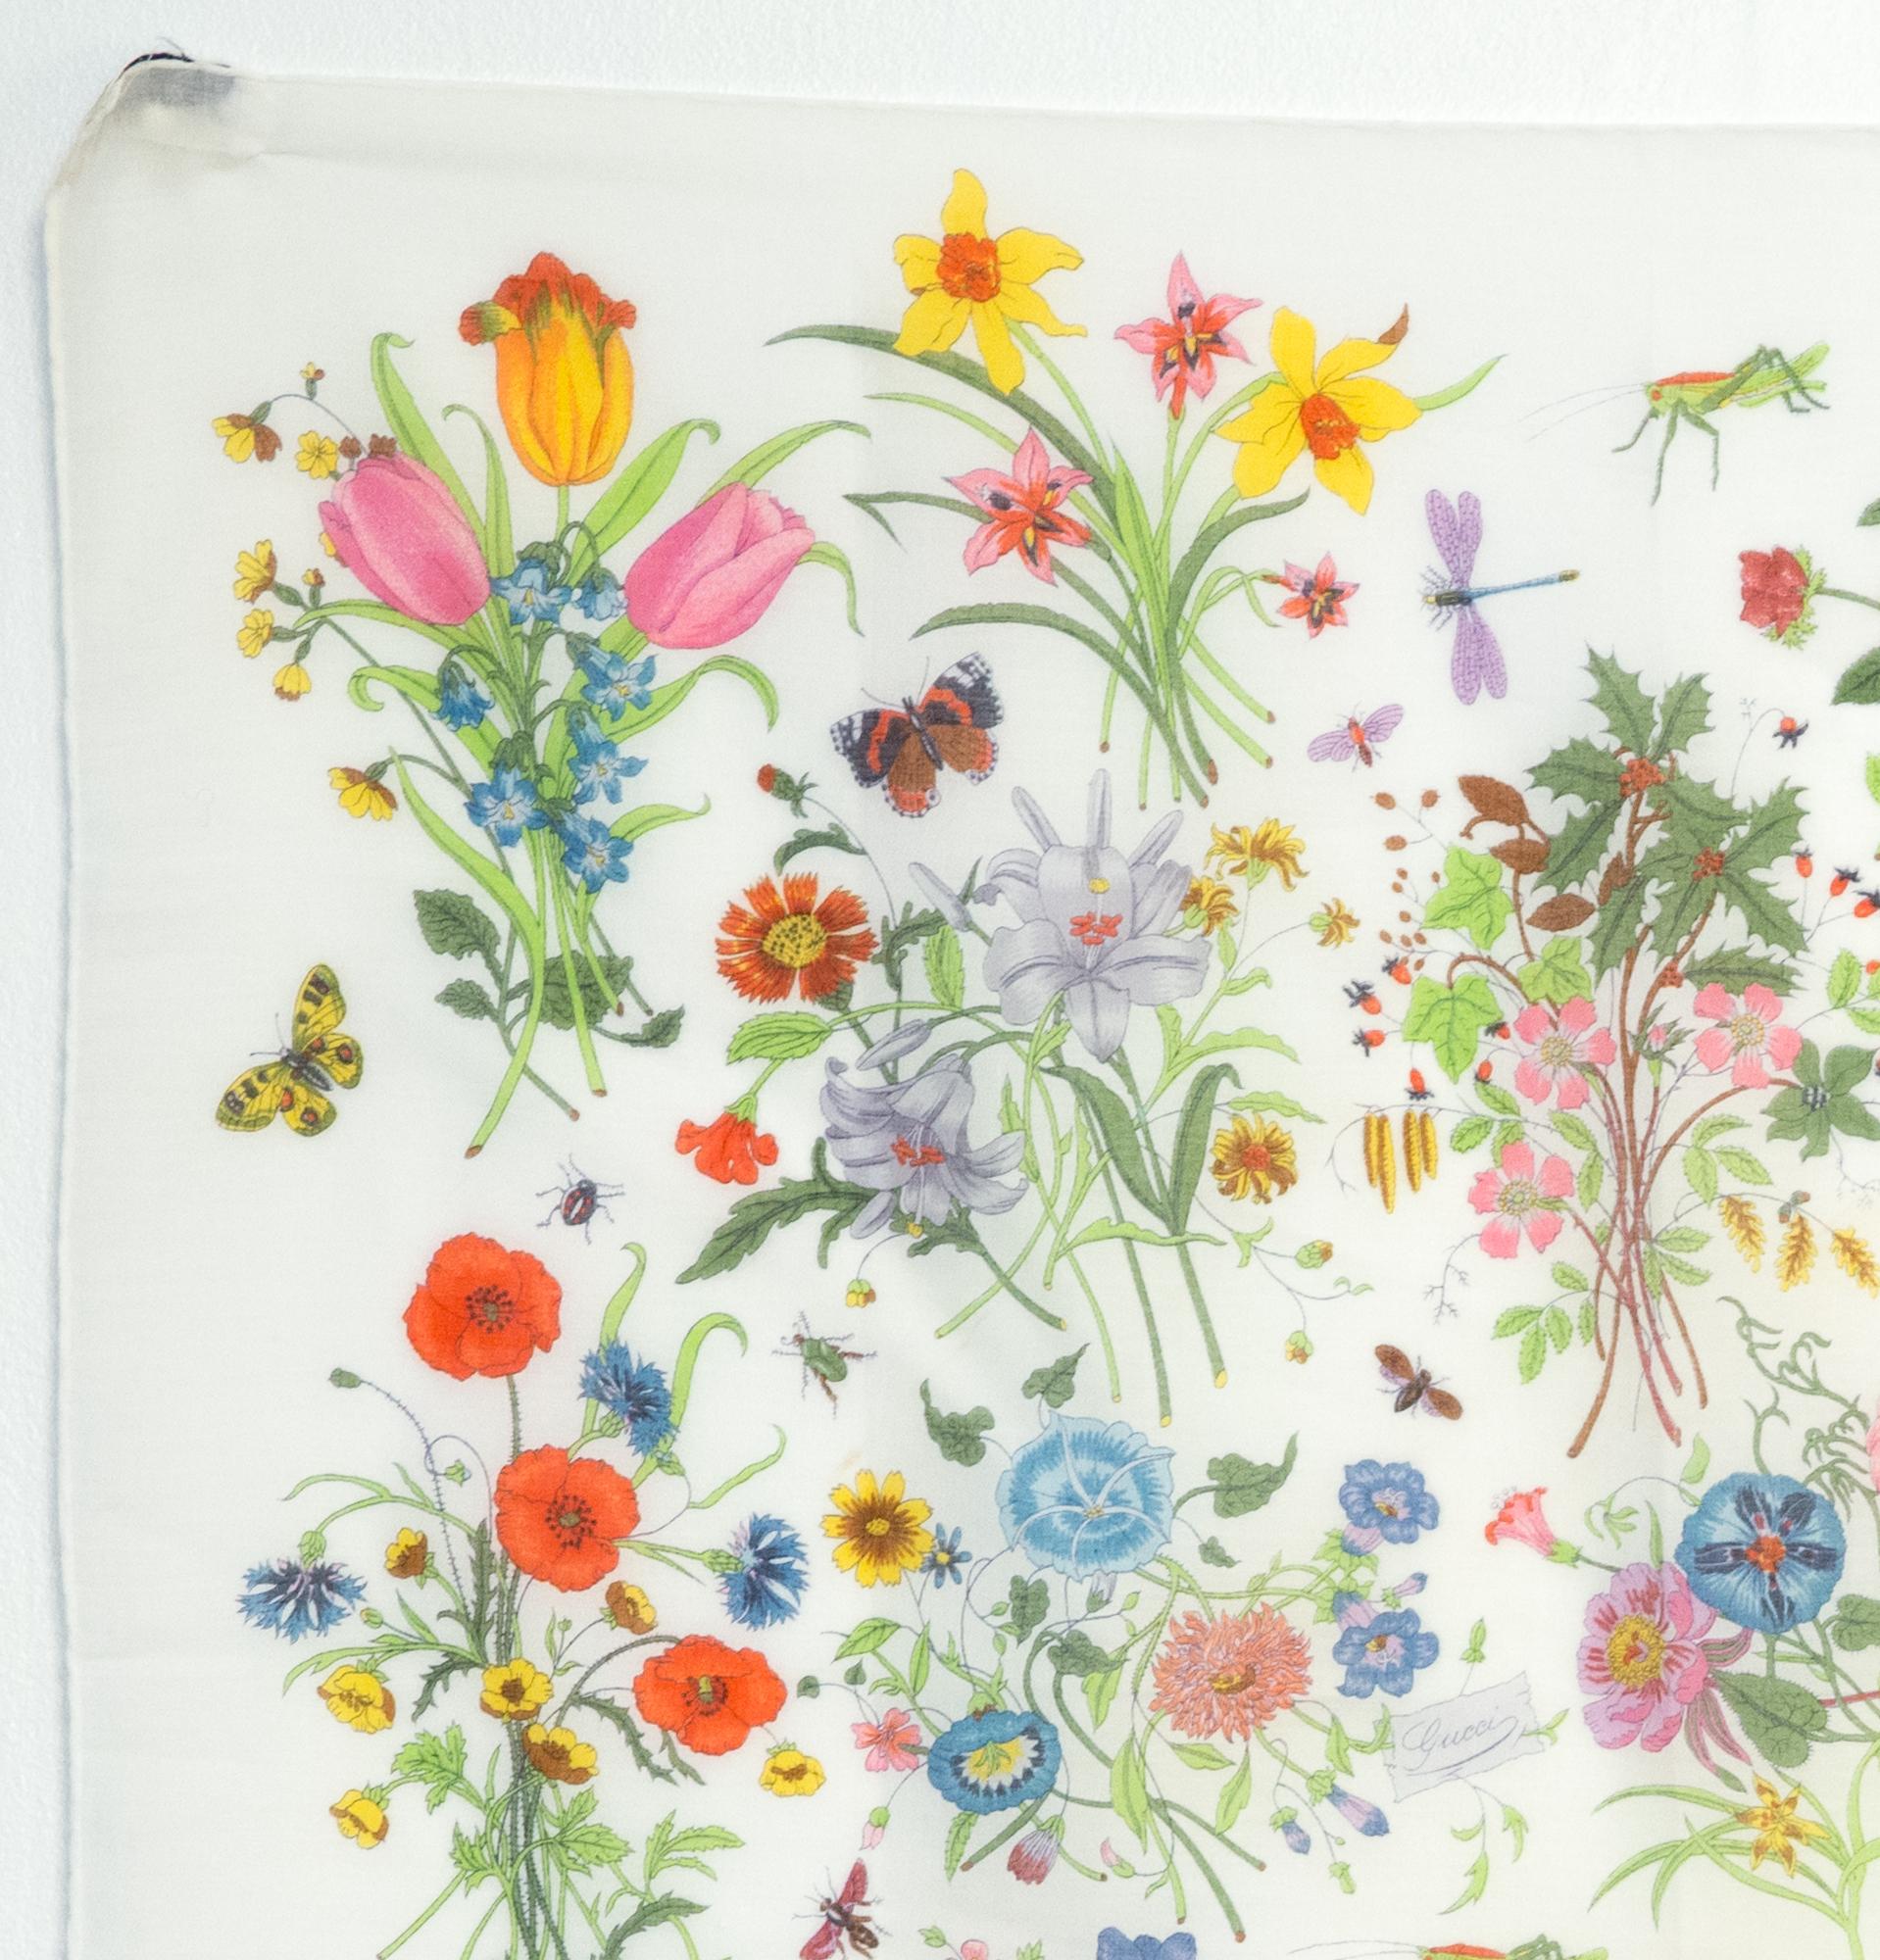 Gucci printed cotton scarf featuring the famous and emblematic Accornero floral print, and a Gucci signature.
In good vintage condition. Made in Italy
26,7in. (68cm) X 26,7in. (68cm)
The print was created in 1965 when Rodolfo Gucci commissioned